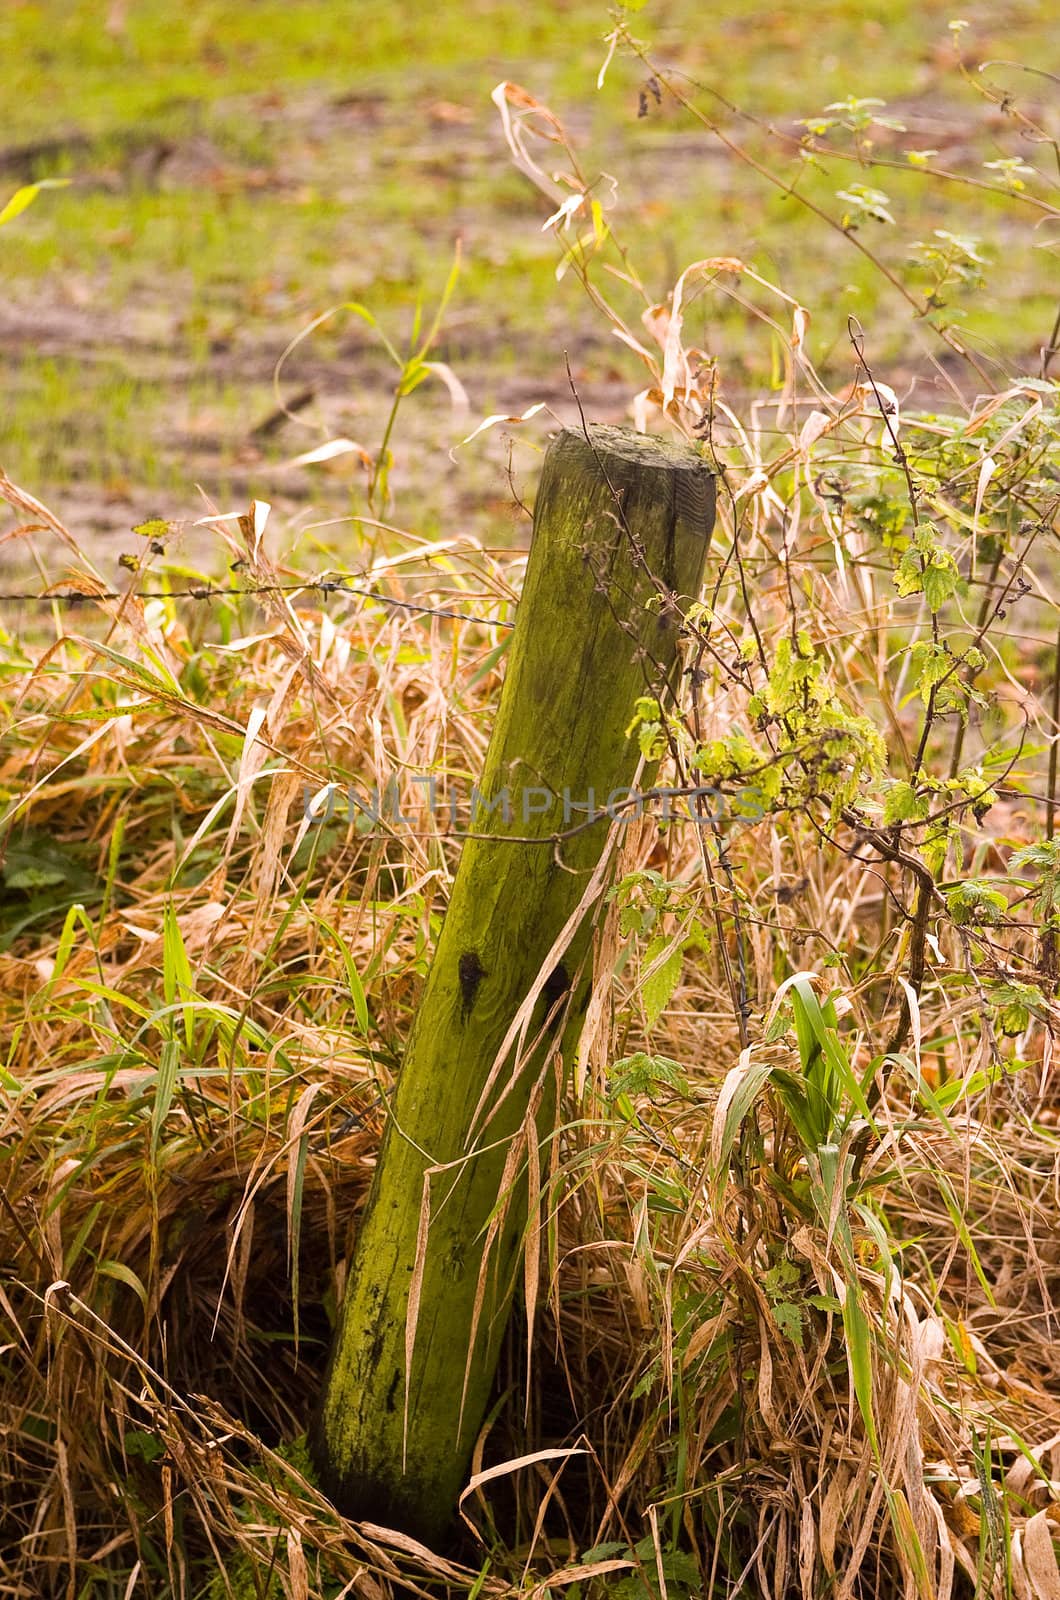 Fence pole covered in moss and grass